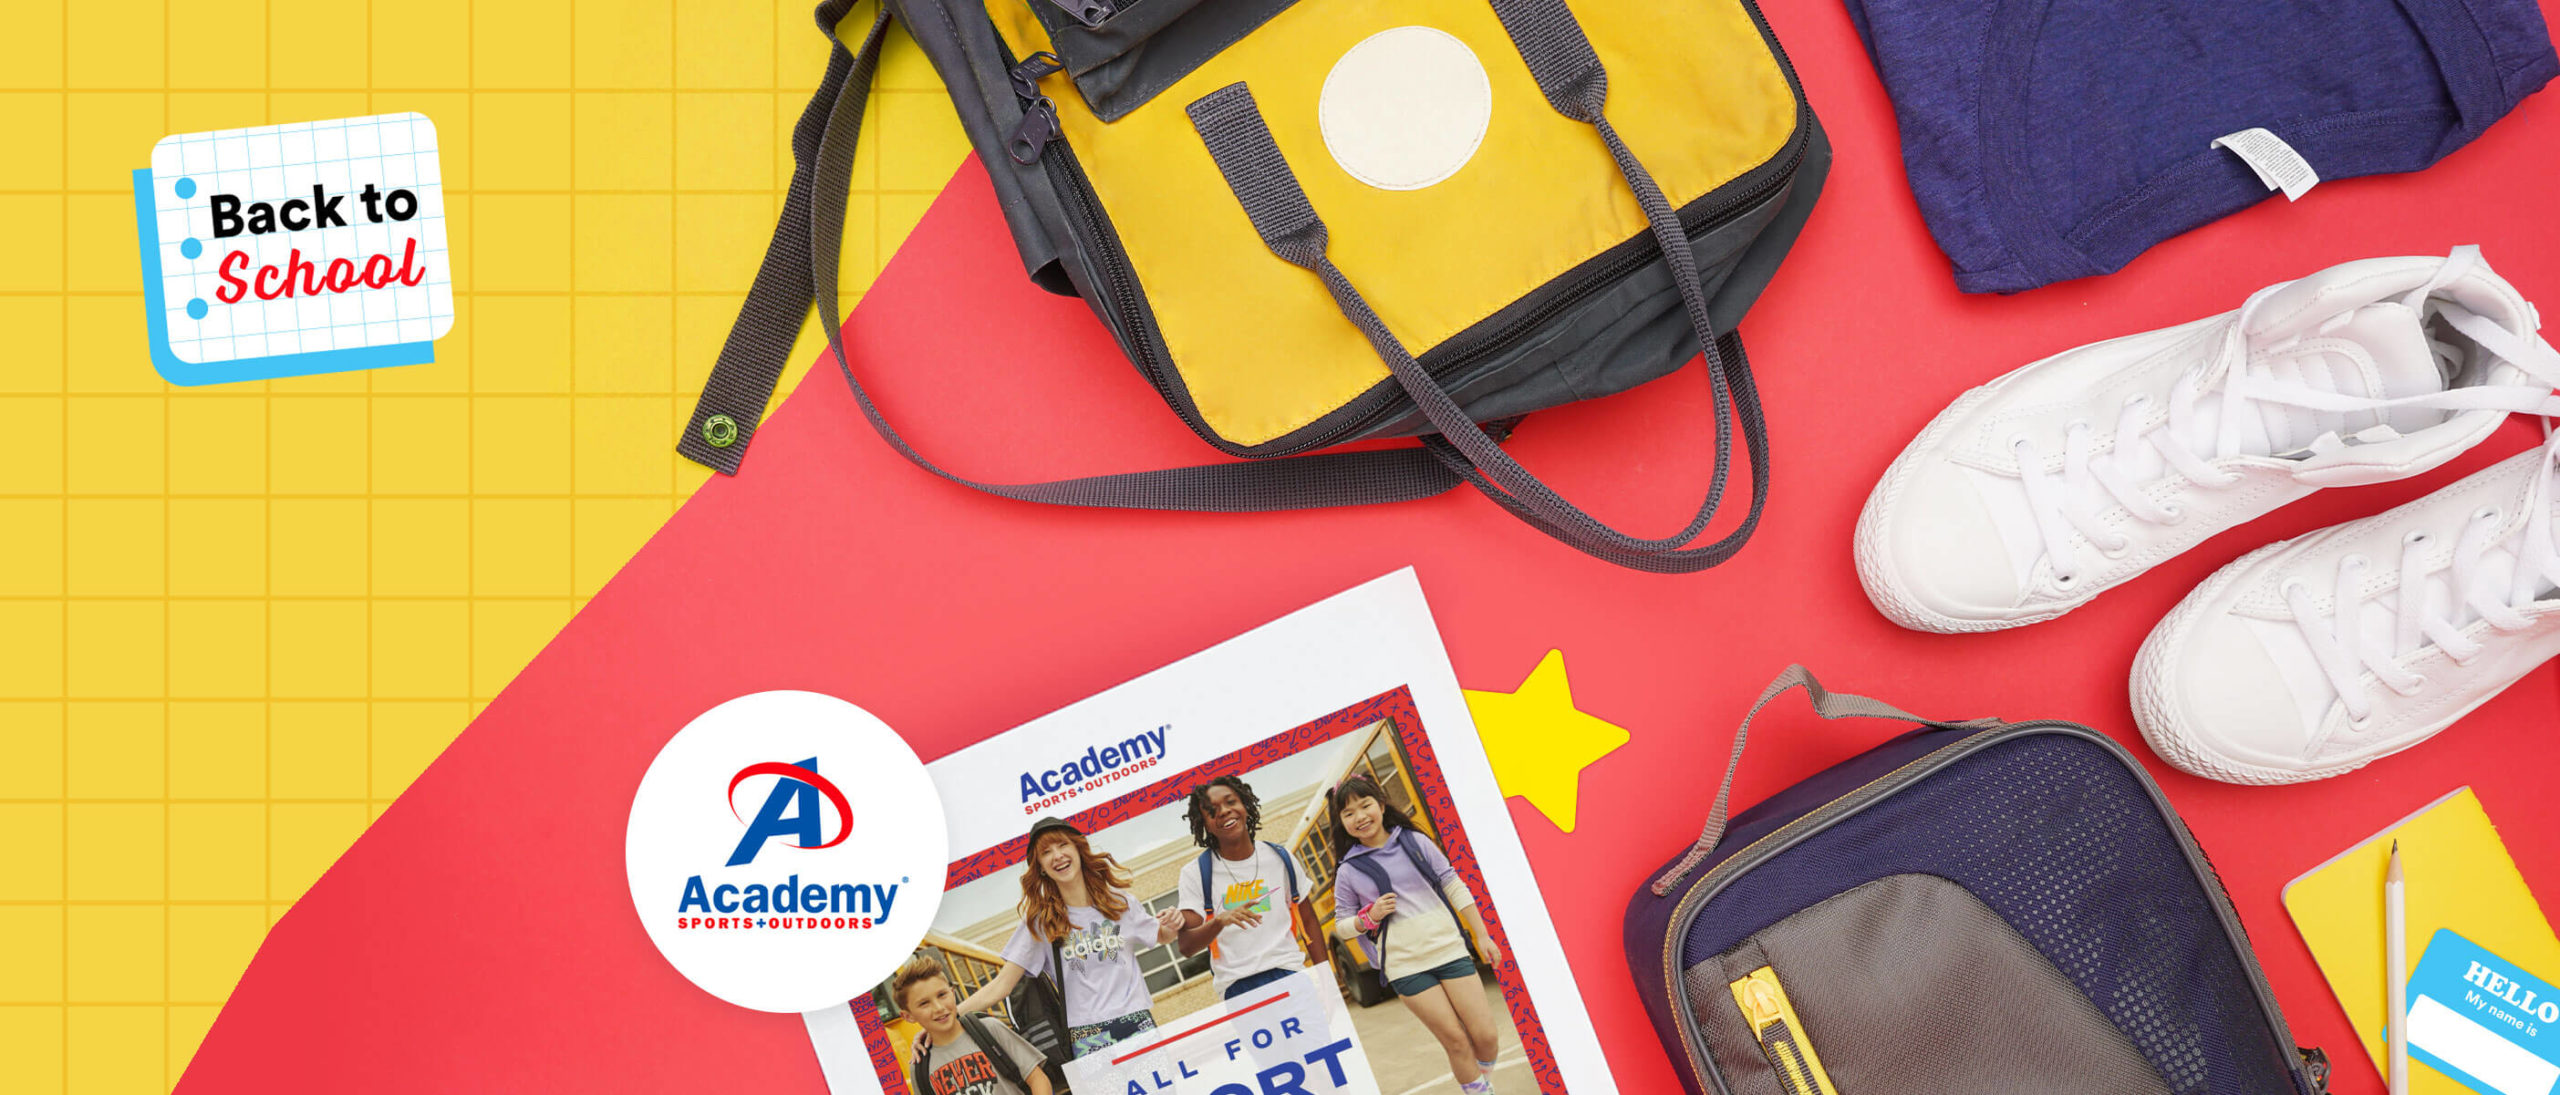 Flipp’s Top Five Back-to-School Picks From Academy Sports + Outdoors